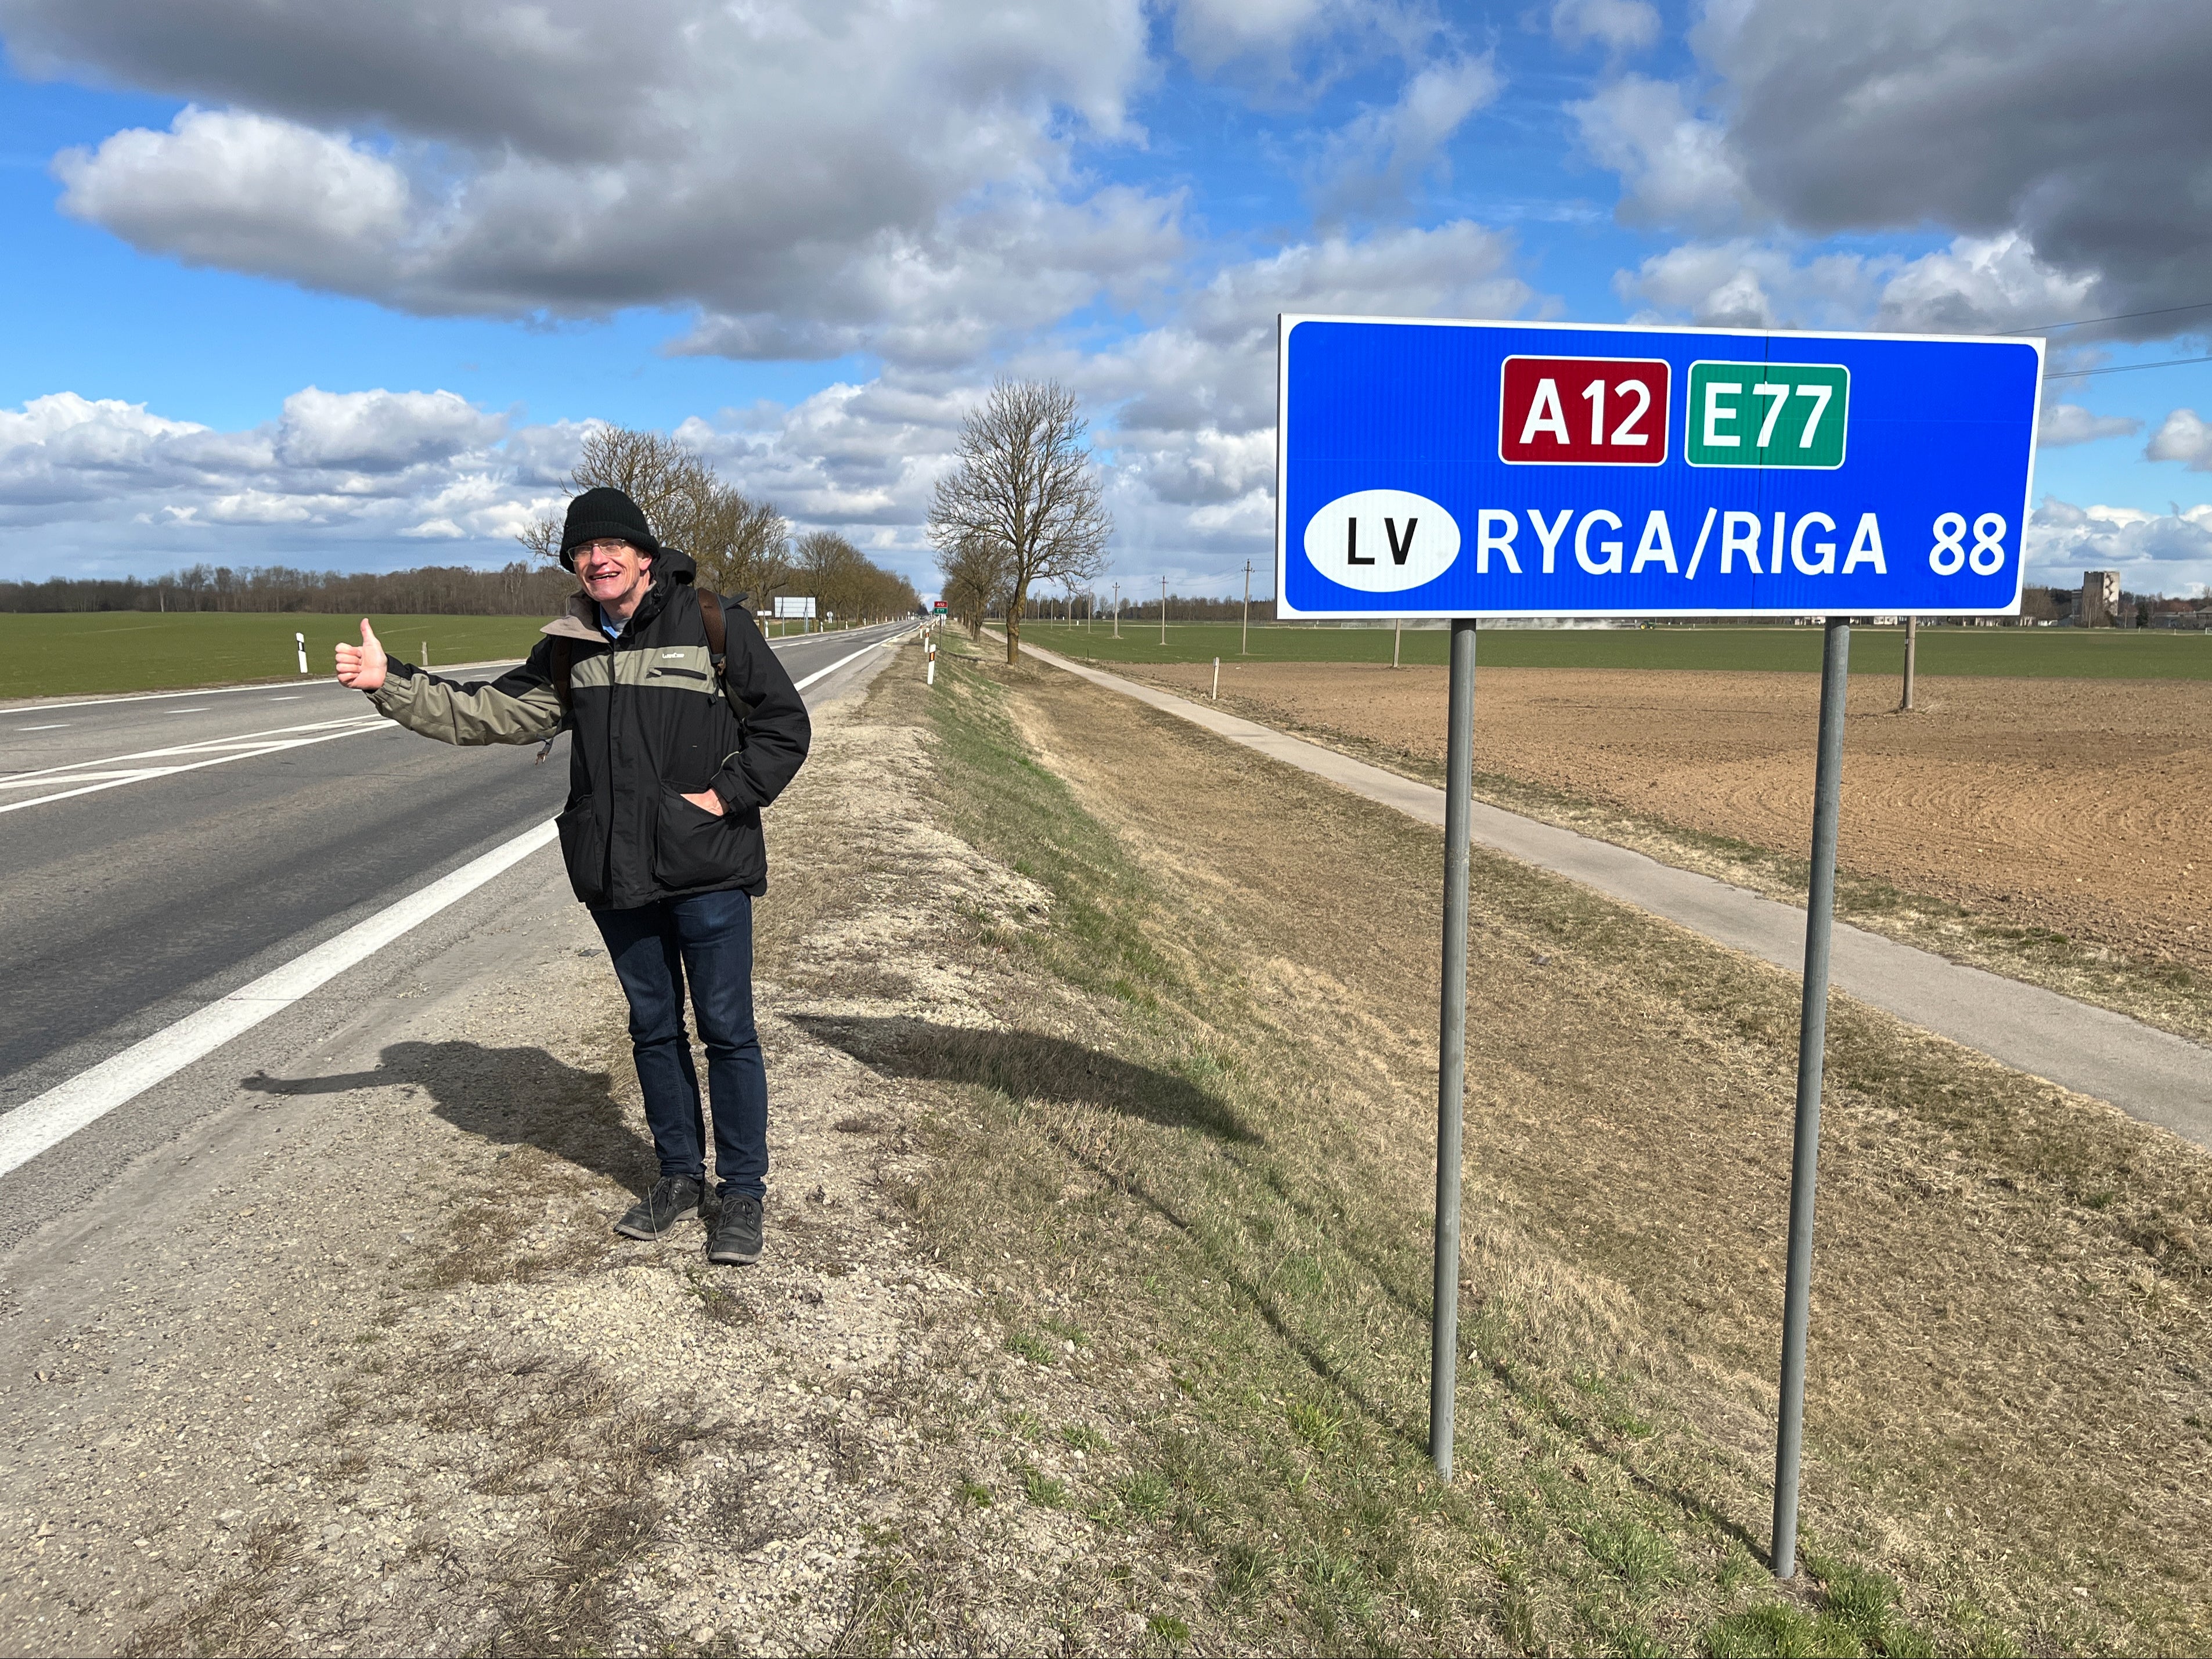 Dodgy character: vainly hitchhiking on the E77 highway from Lithuania towards Riga